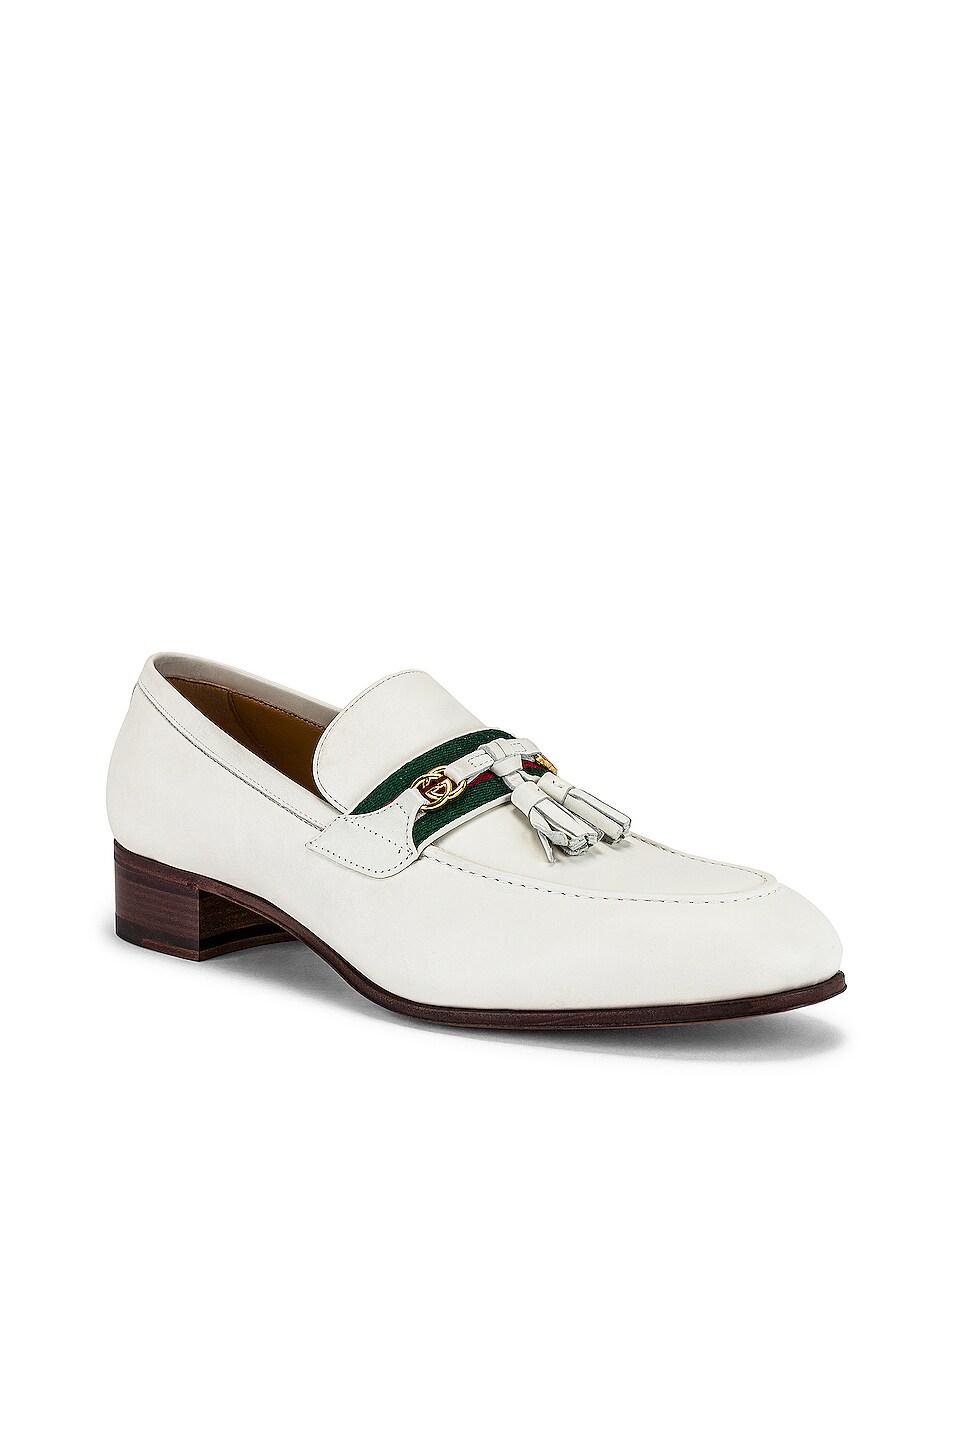 Image 1 of Gucci Paride Loafer in Dusty White